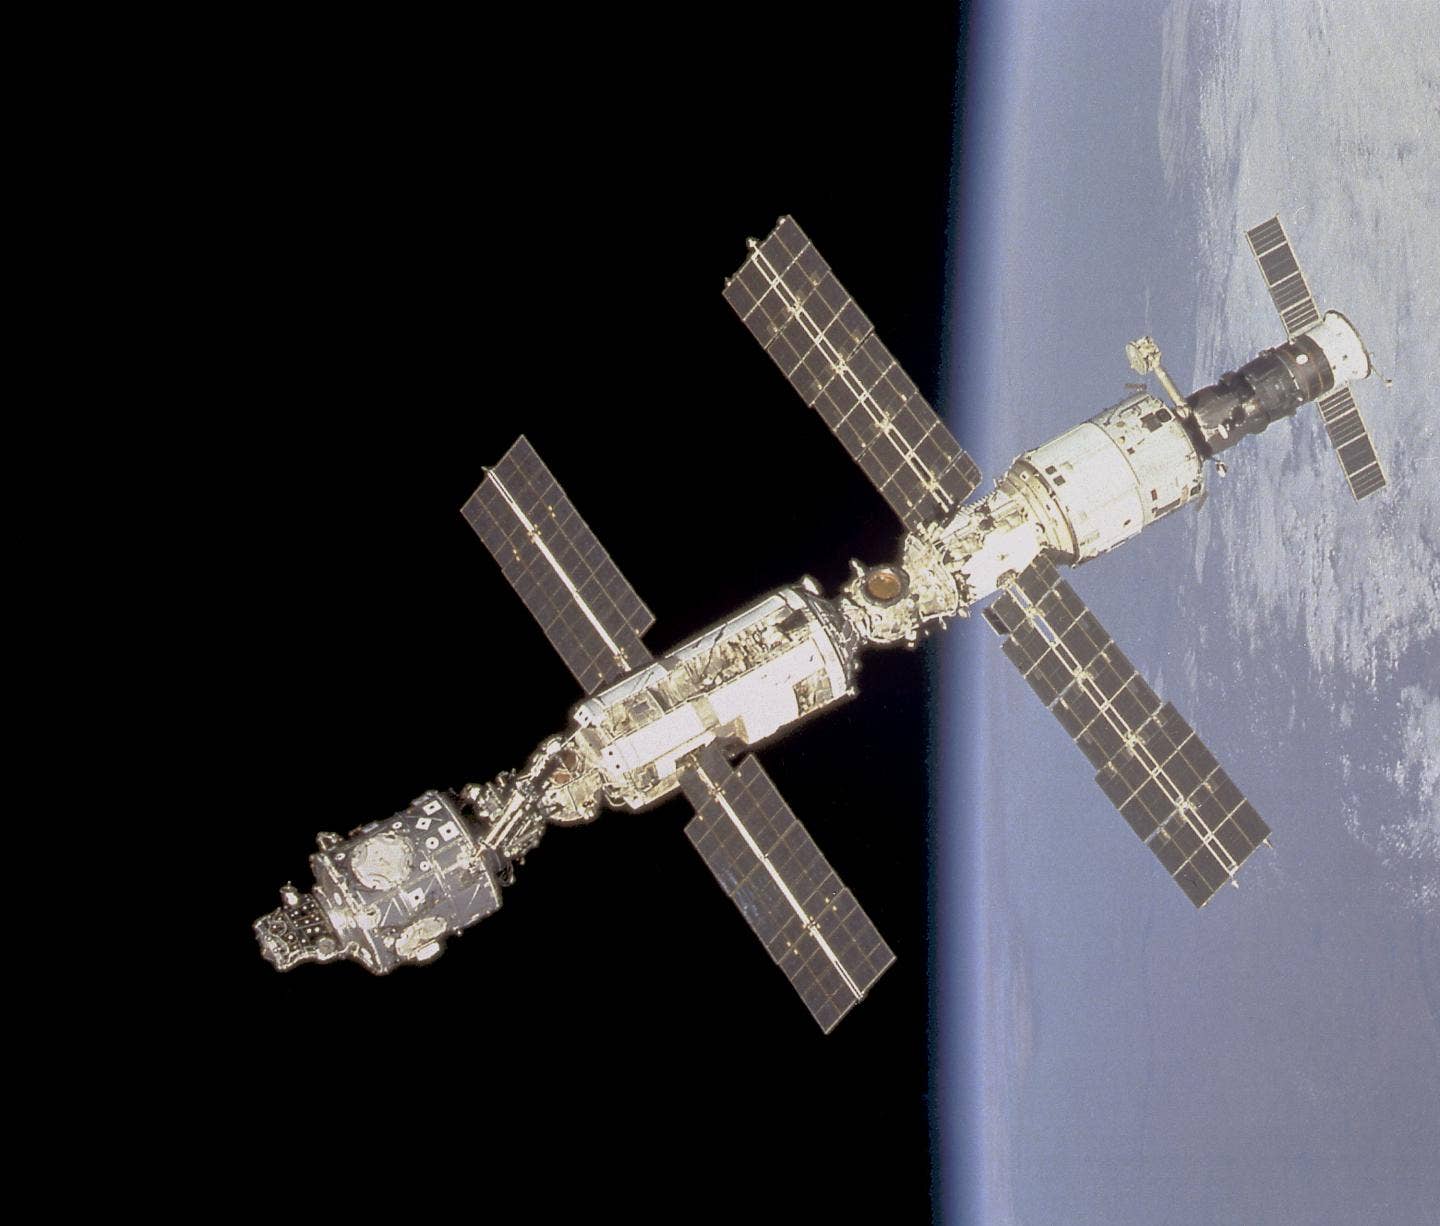 Russian thrusters accidentally tilt International Space Station again